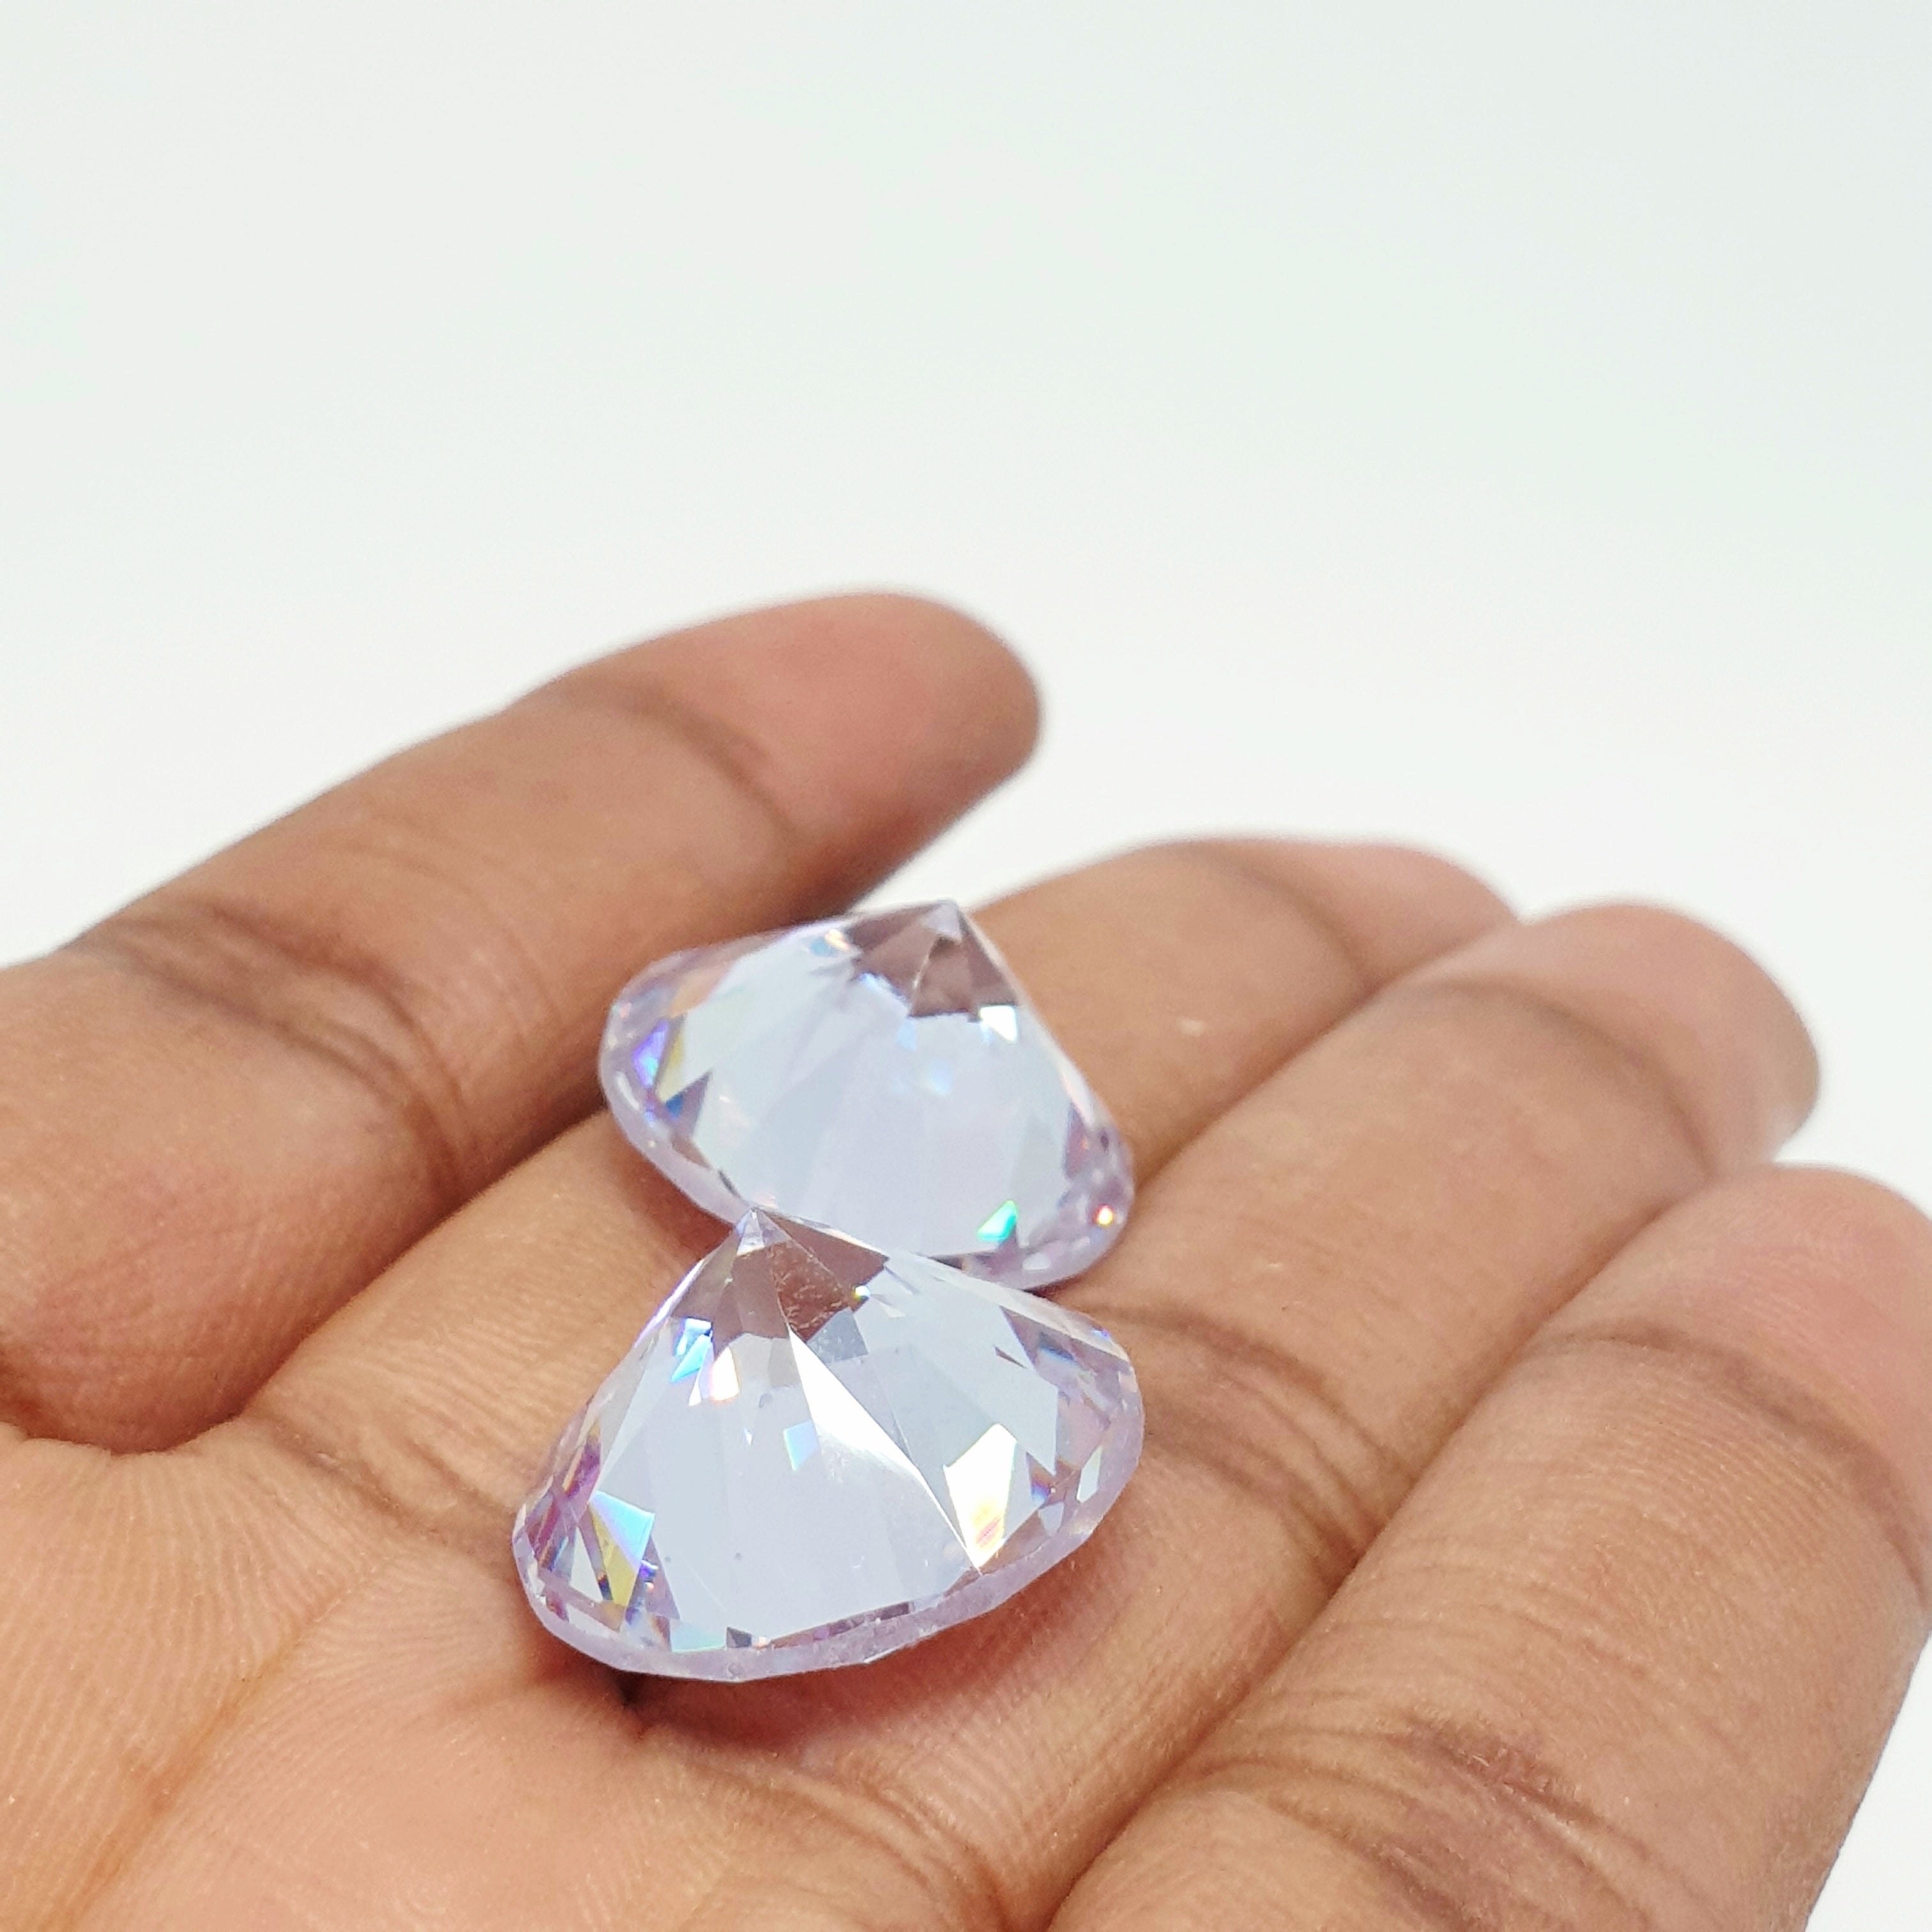 MajorCrafts 2pcs 18mm AAAAA (5A) Crystal Clear Round Point Back Cubic Zirconia Stones